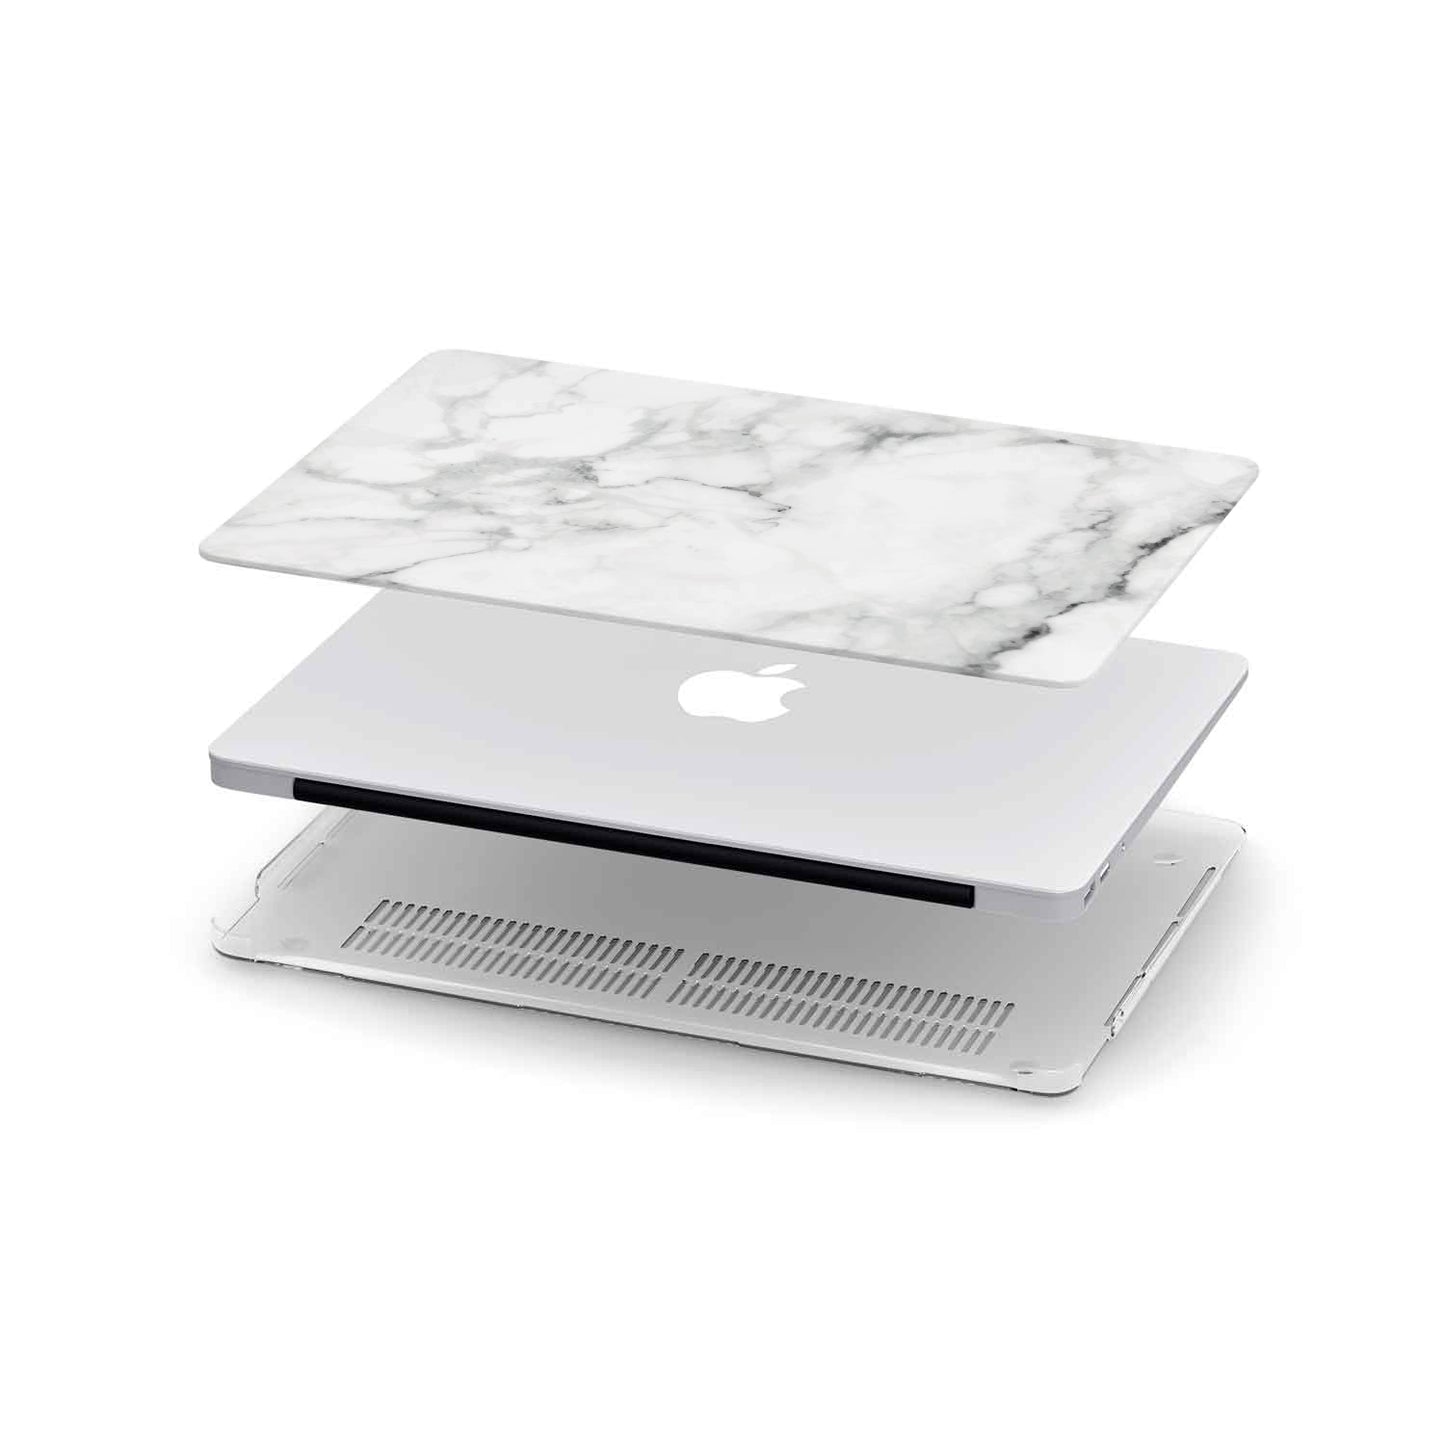 Load image into Gallery viewer, Macbook Hard Shell Case - White Marble
